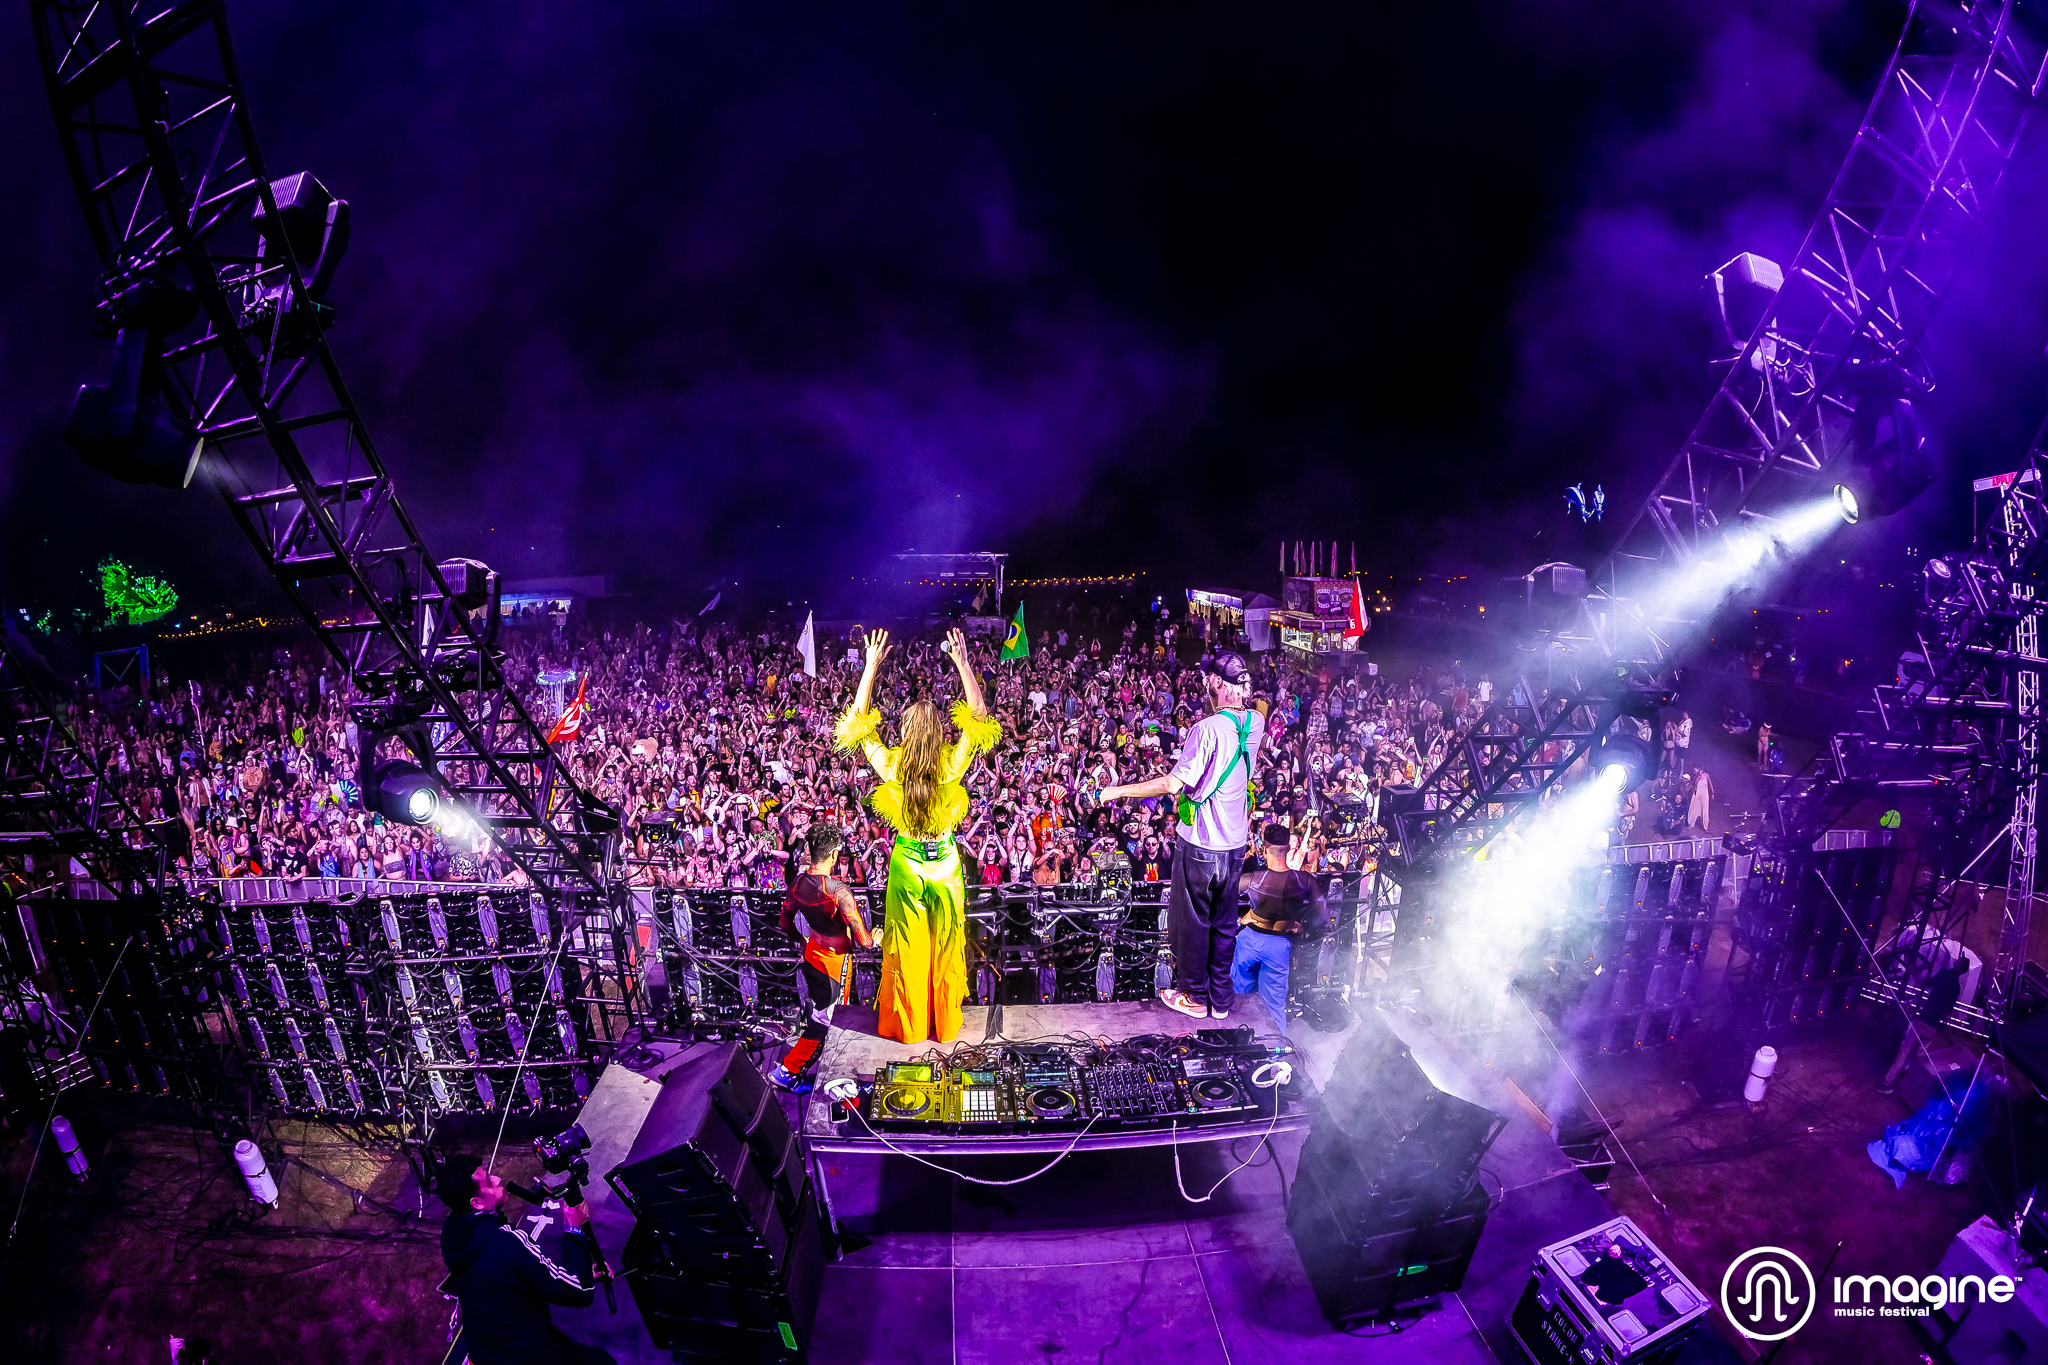 Sofi Tukker standing on stage dressed in colorful outfits, waving to the crowd